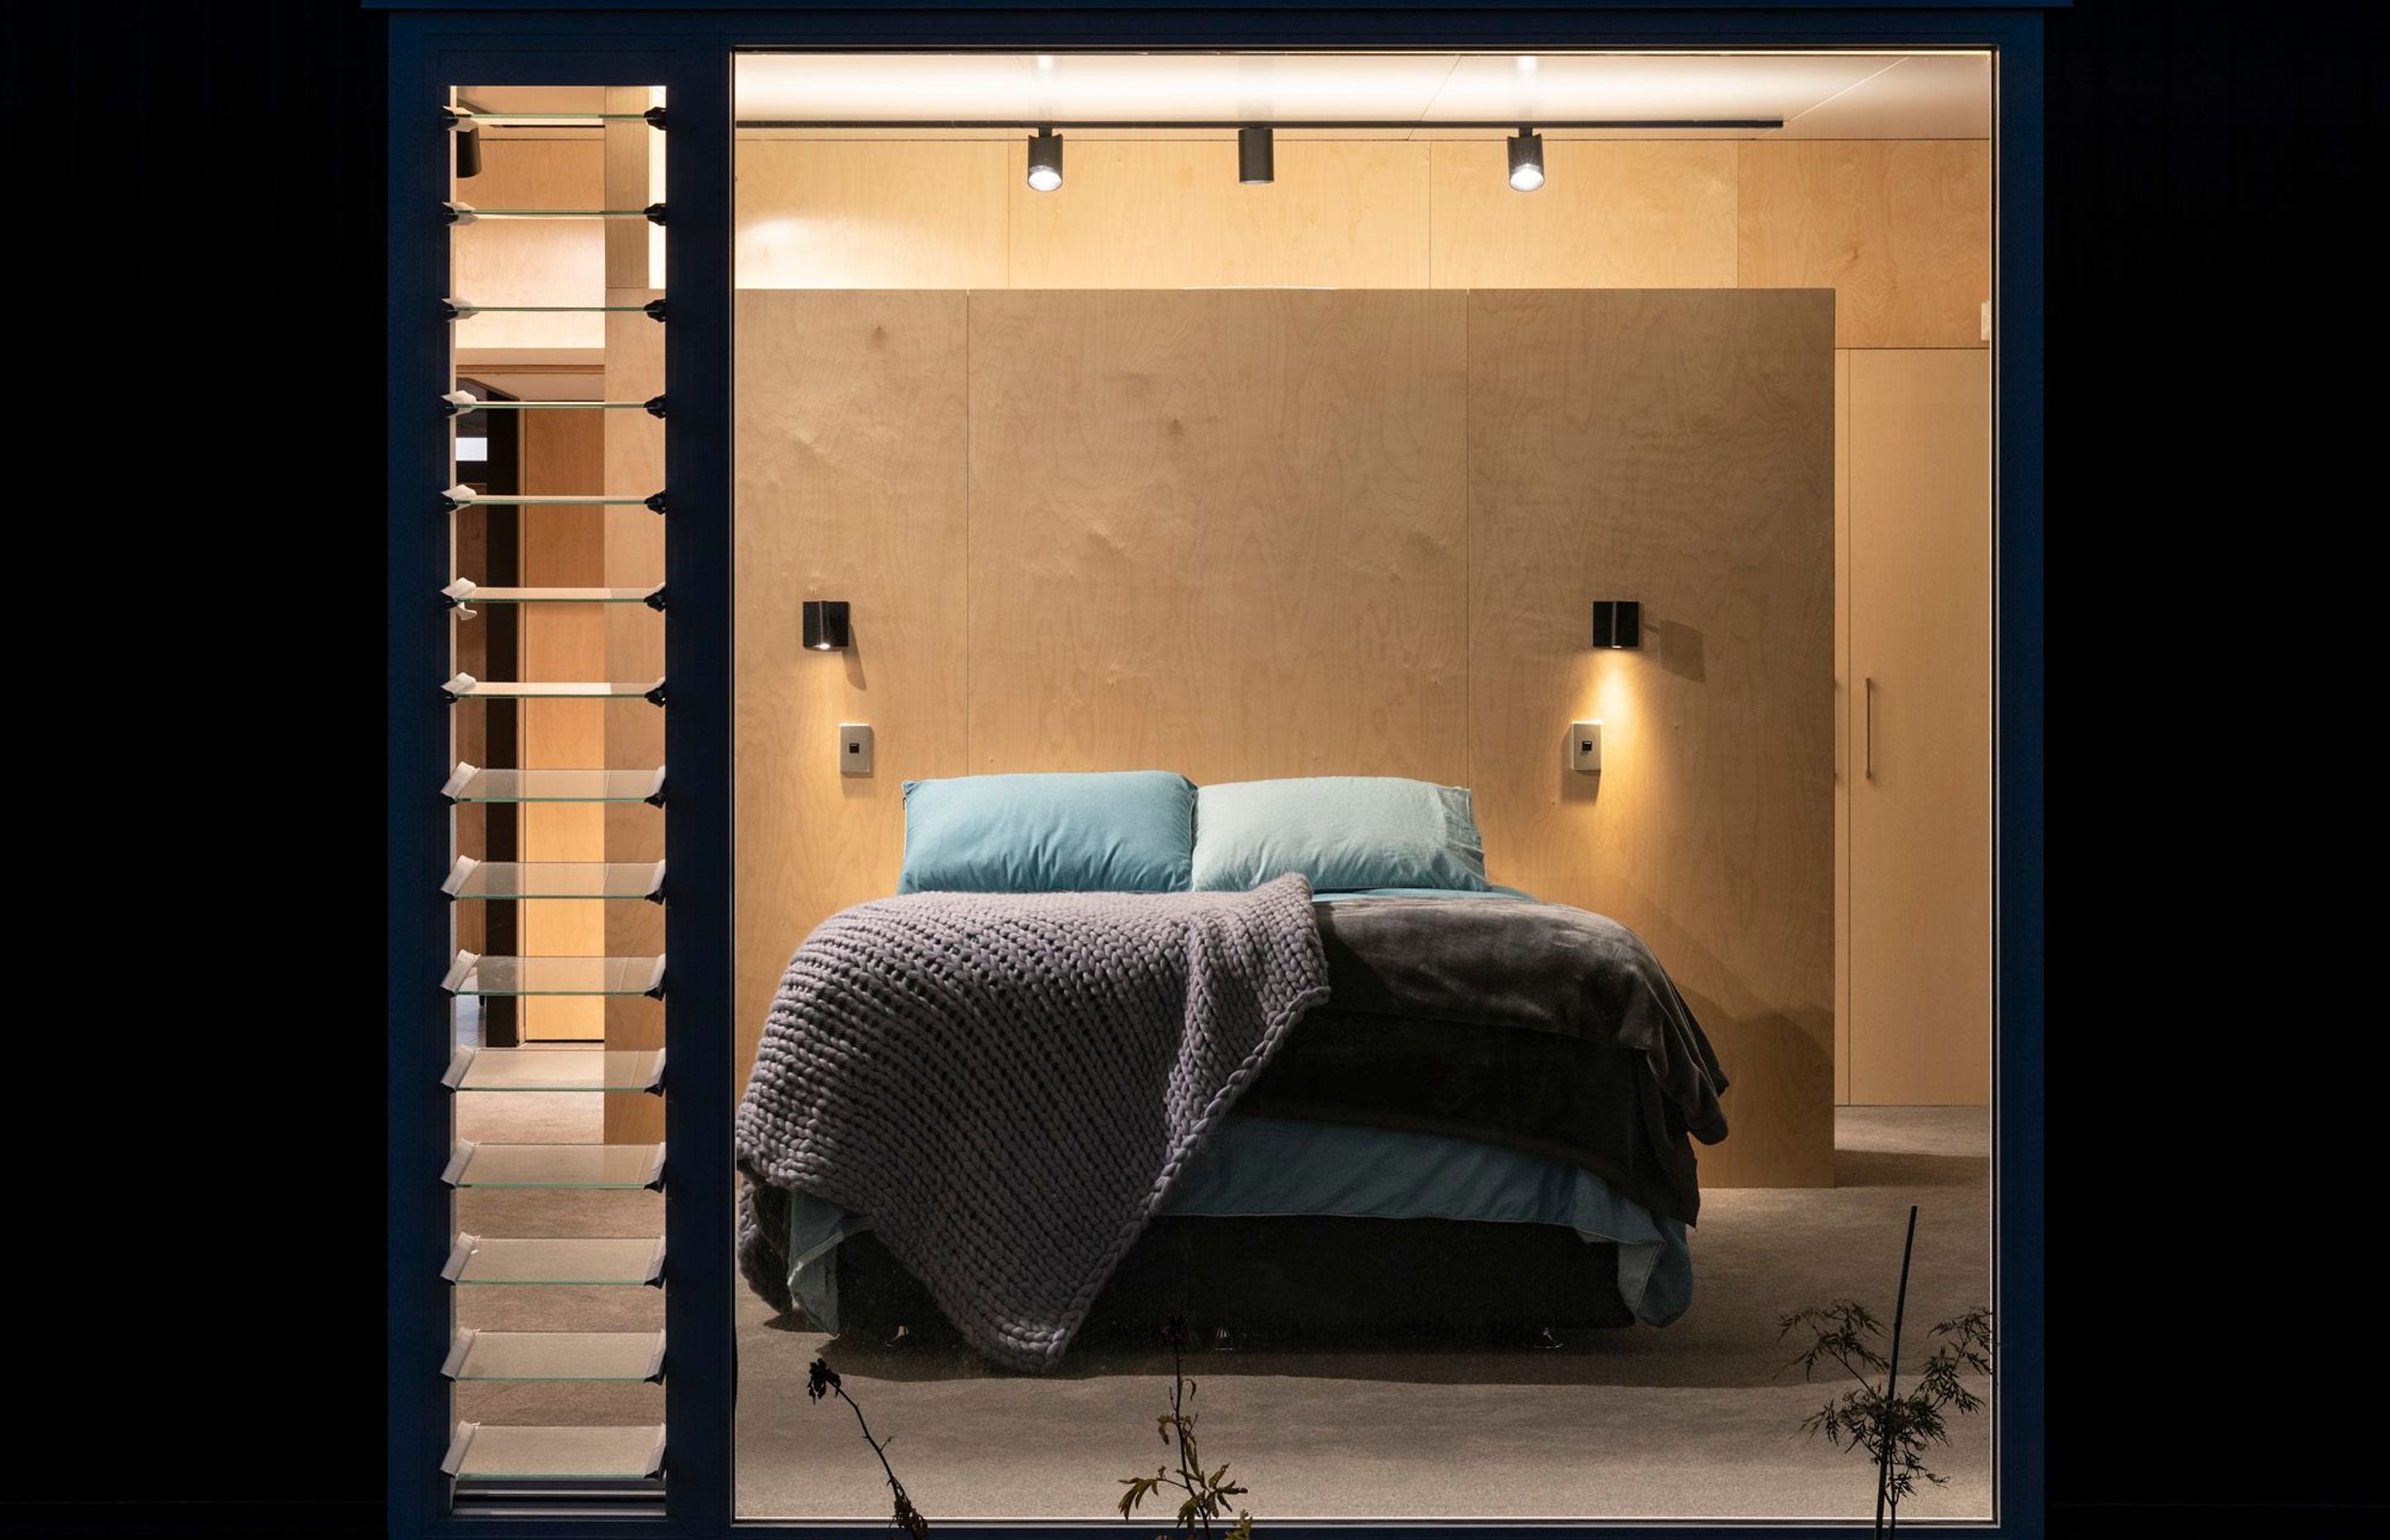 The master bedroom has a walk-in wardrobe created by a plywood divider, so it remains light and open. Photograph: Simon Devitt.